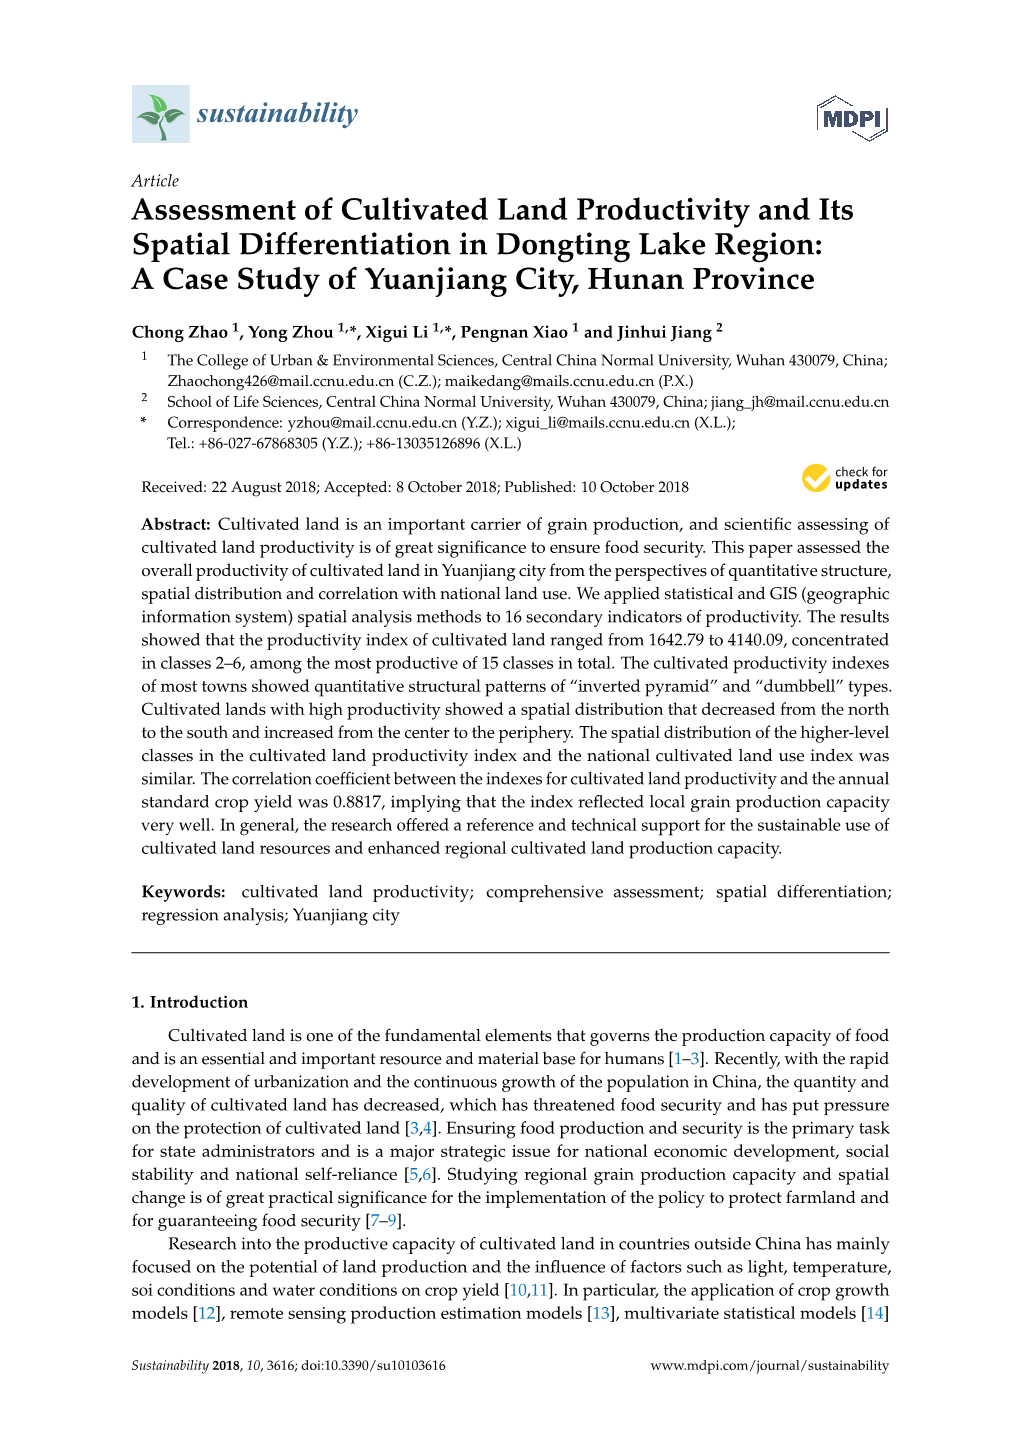 Assessment of Cultivated Land Productivity and Its Spatial Differentiation in Dongting Lake Region: a Case Study of Yuanjiang City, Hunan Province